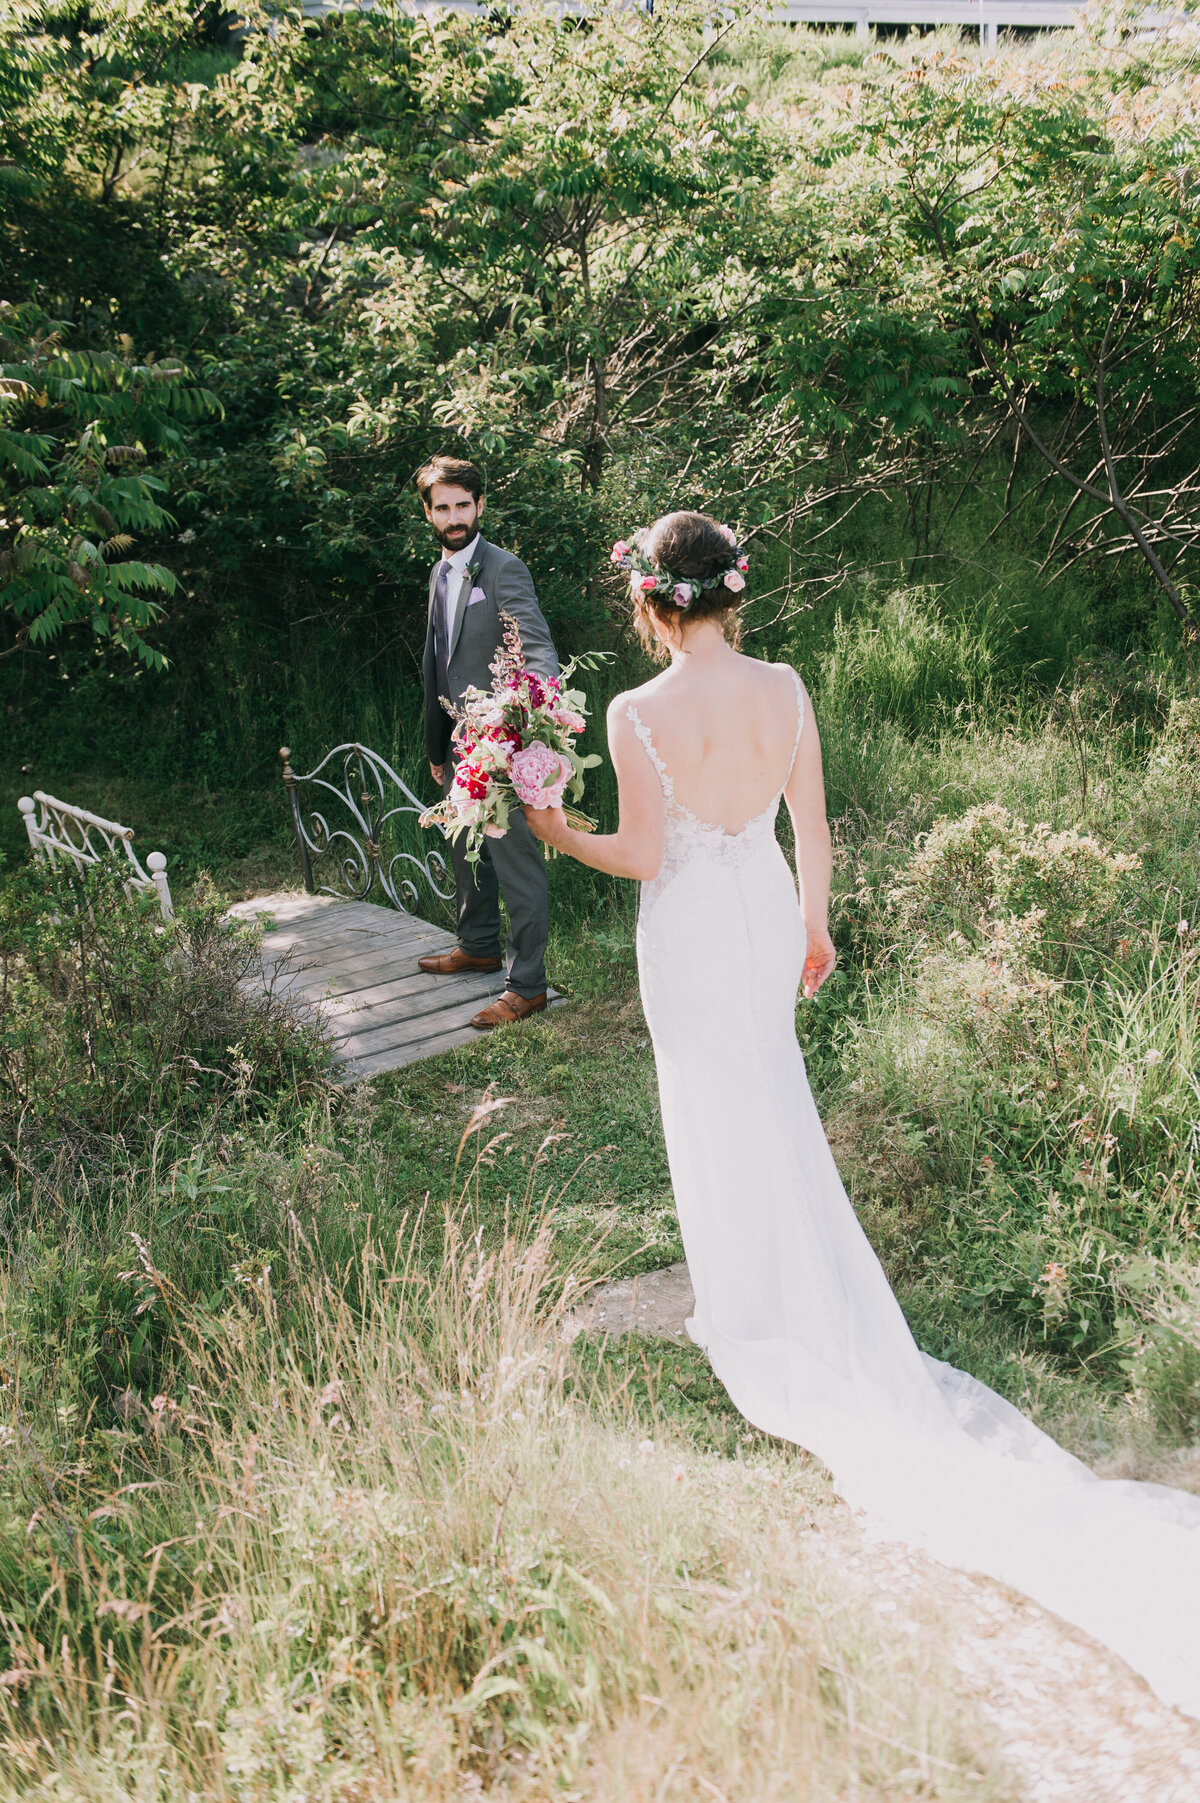 Maine and Boston wedding photographer Kim Chapman photographs weddings all over New England but this charming venue is one of her favorites